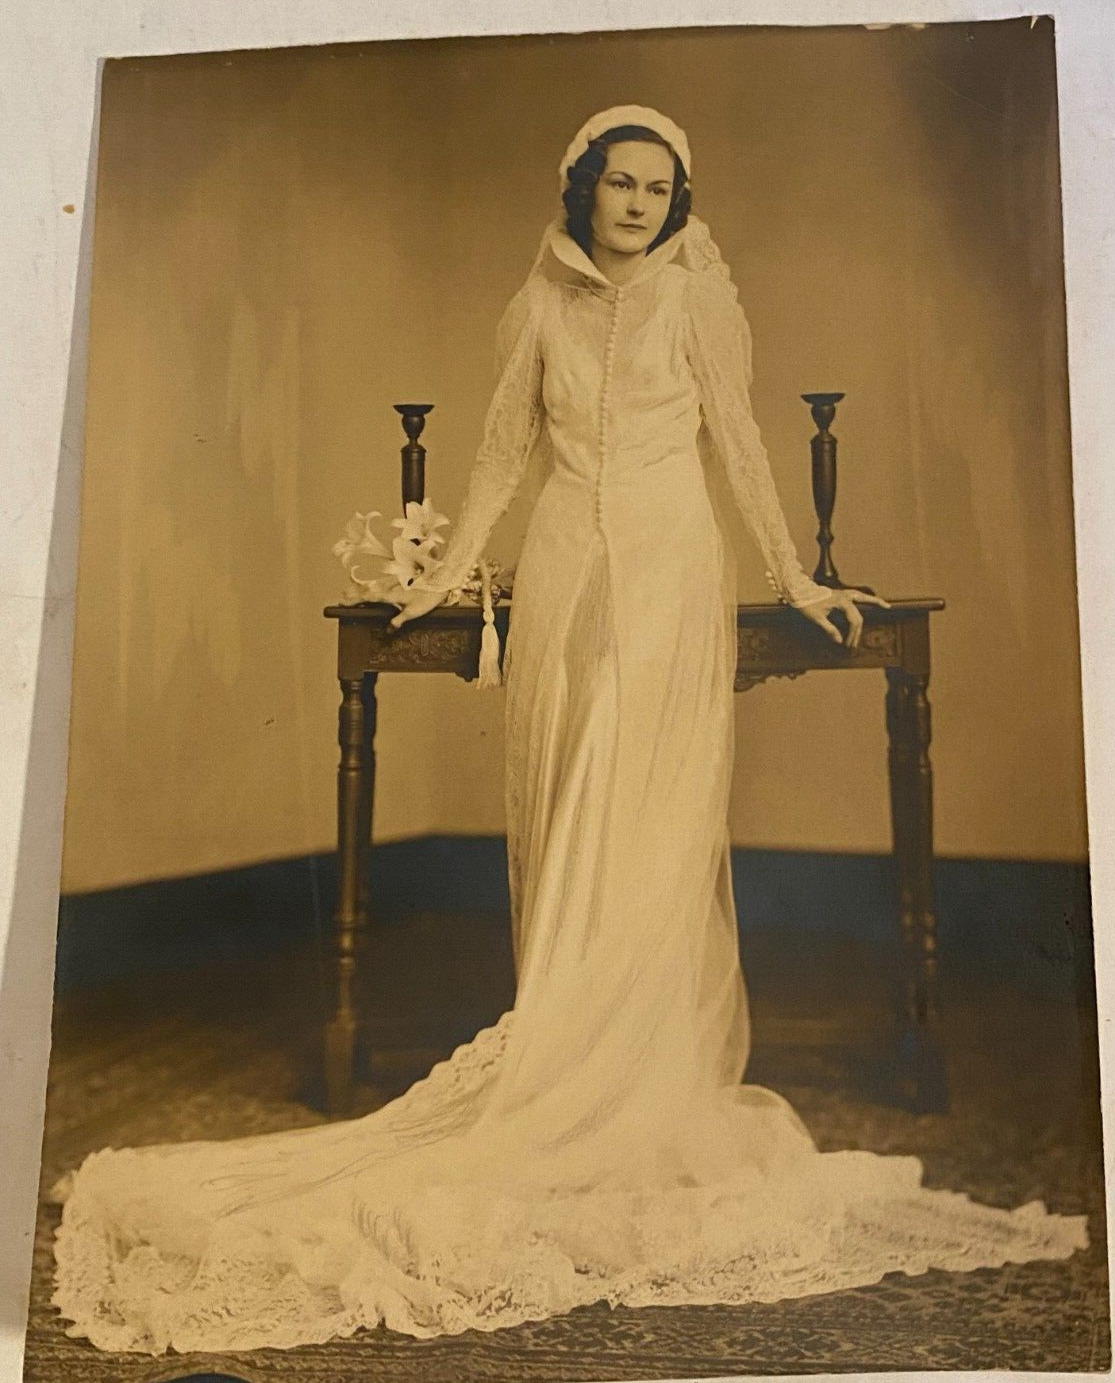 1930s 7x9 Black and White Photograph of Beautiful Bride in Her Wedding Dress